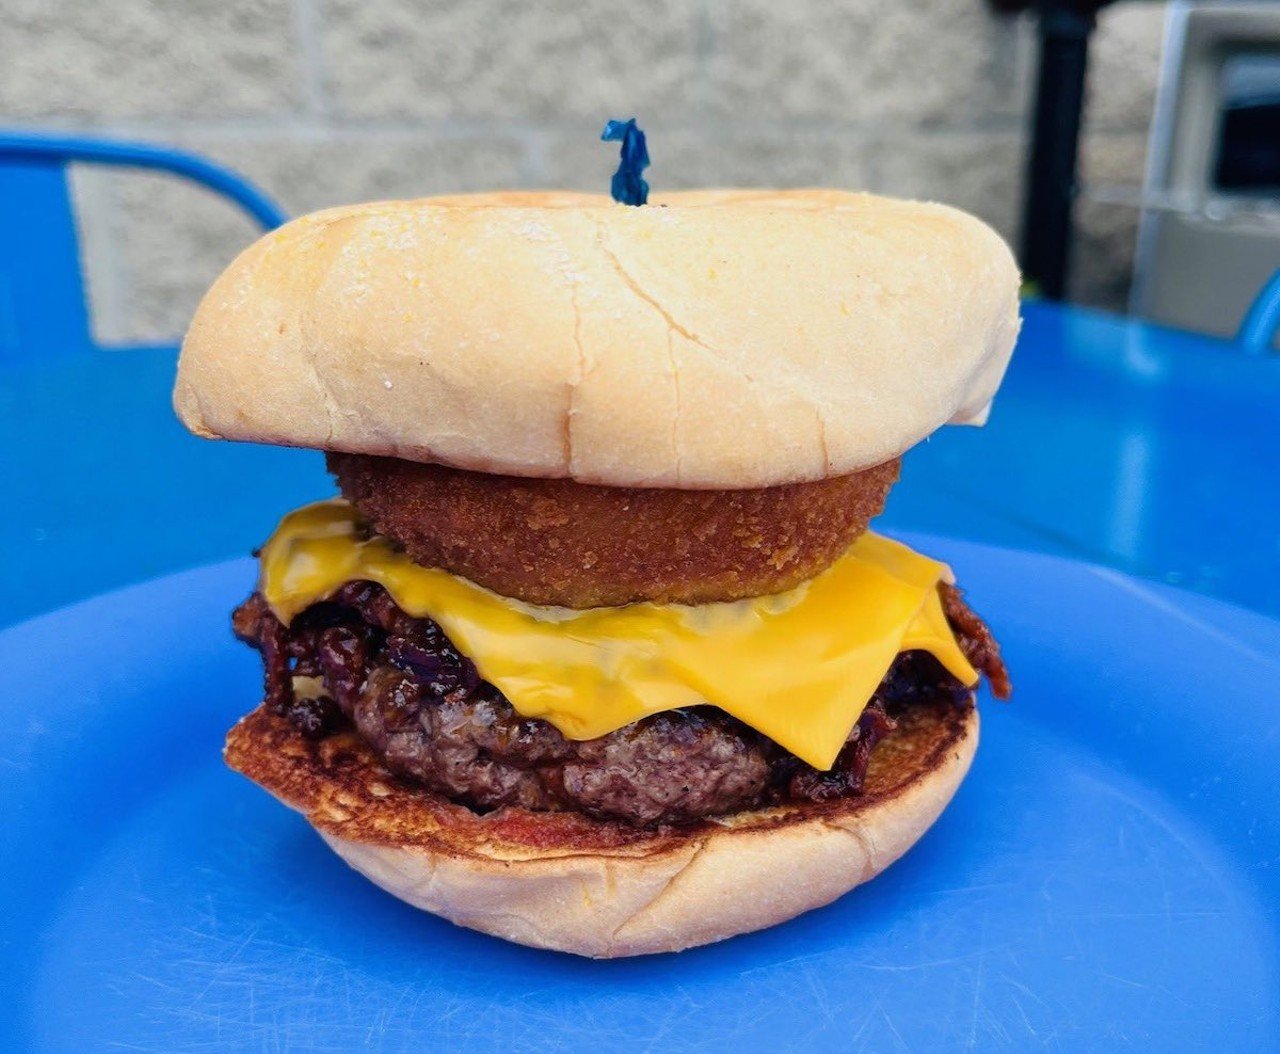 Bucketheads: The Godfather Burger
6507 Harrison Ave., Green Township
Who it’s named after: Dontay Corleone, defensive tackle for the Cincinnati Bearcats
The burger: Topped with BBQ beef brisket, American cheese and an onion ring.